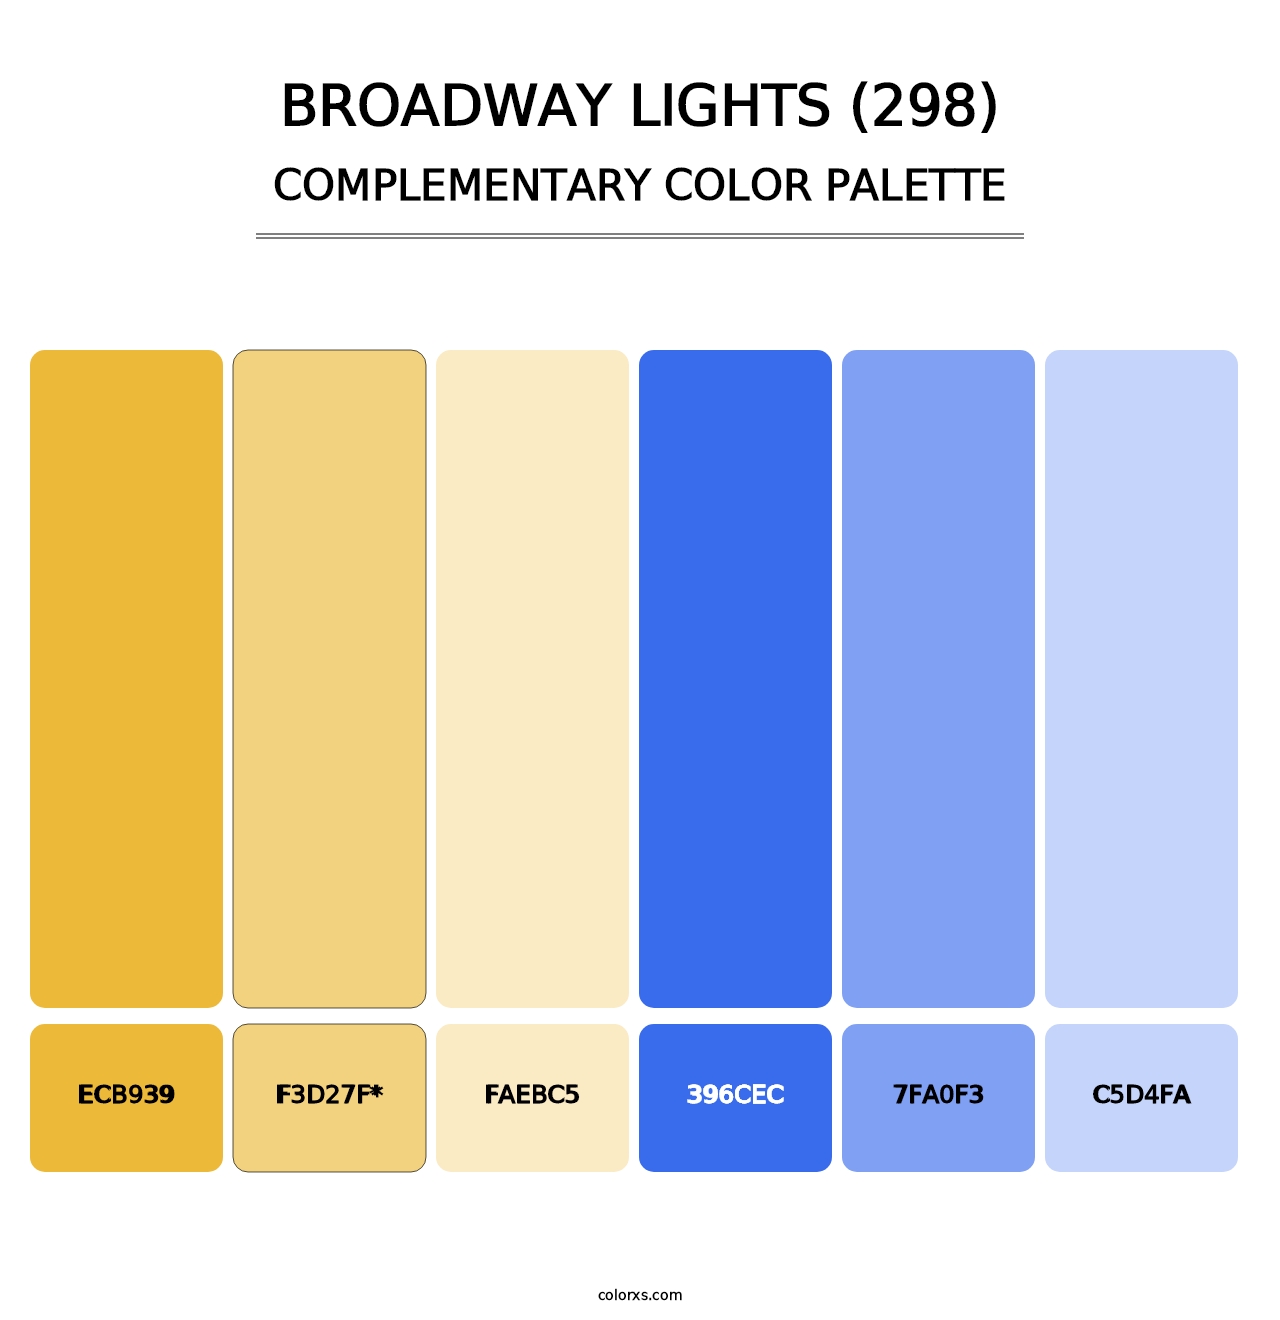 Broadway Lights (298) - Complementary Color Palette